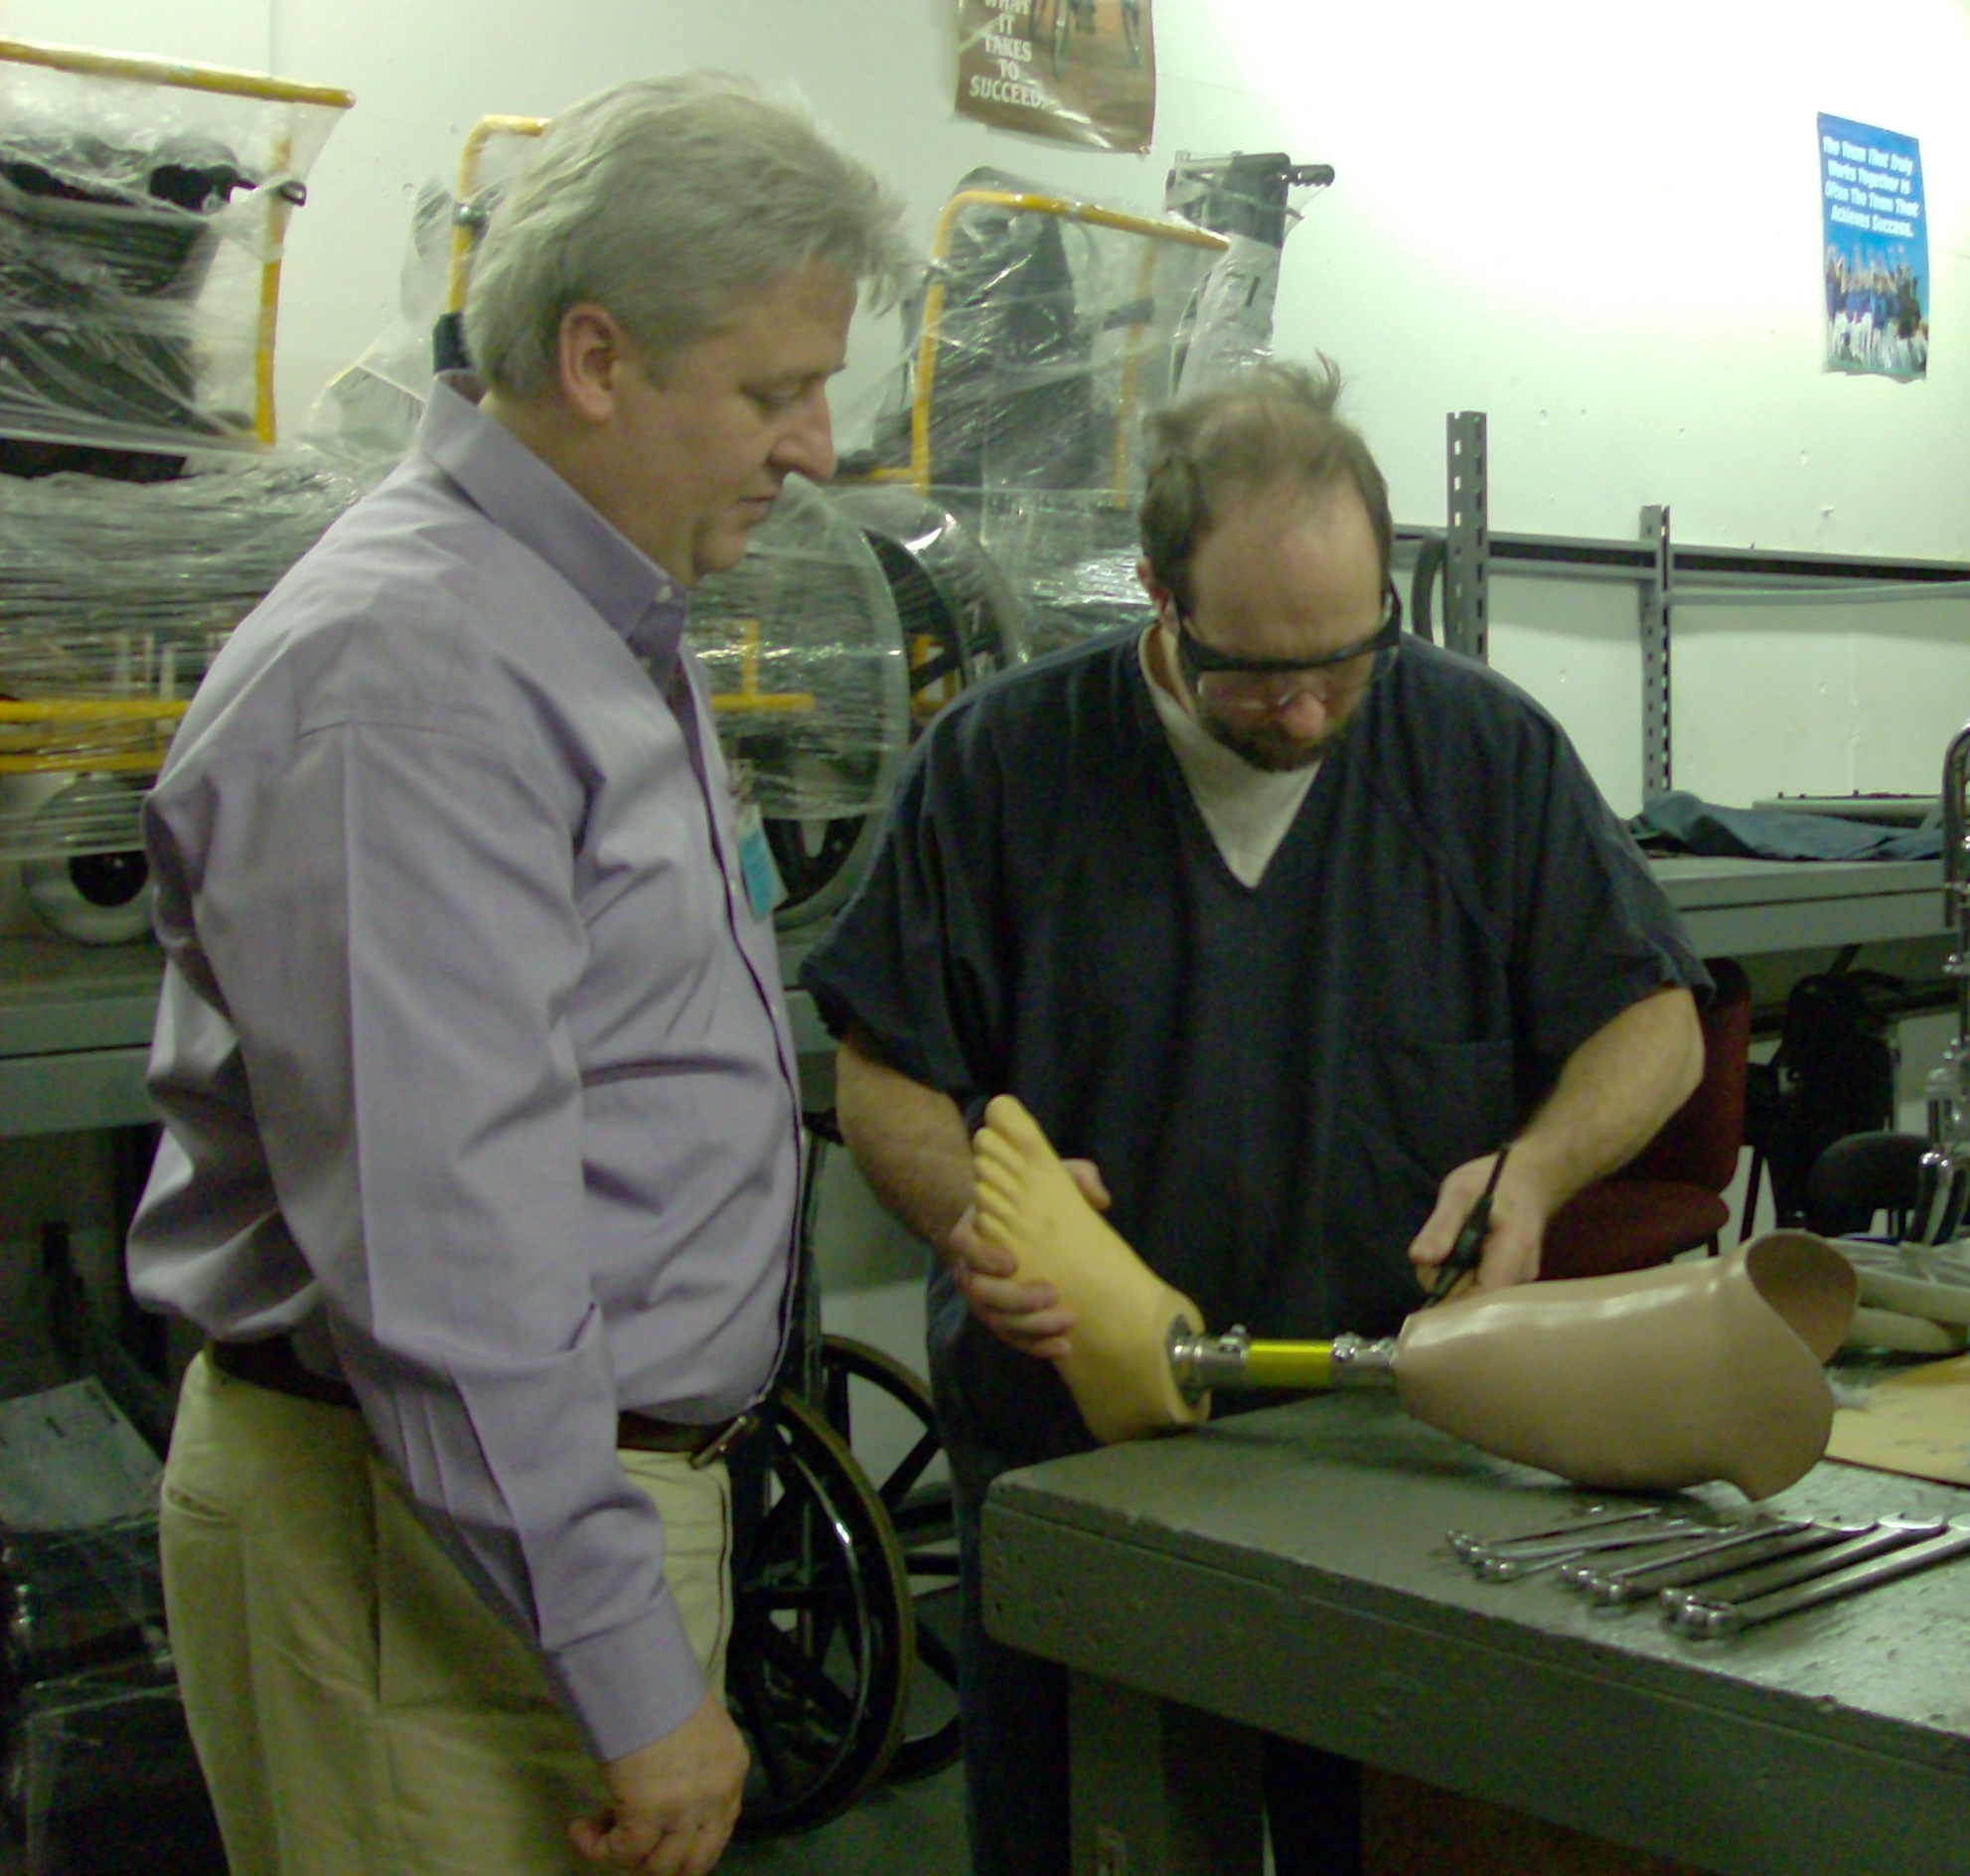 SWH President Peter Rosenberger instructing an inmate on how to disassemble a used prosthetic leg.